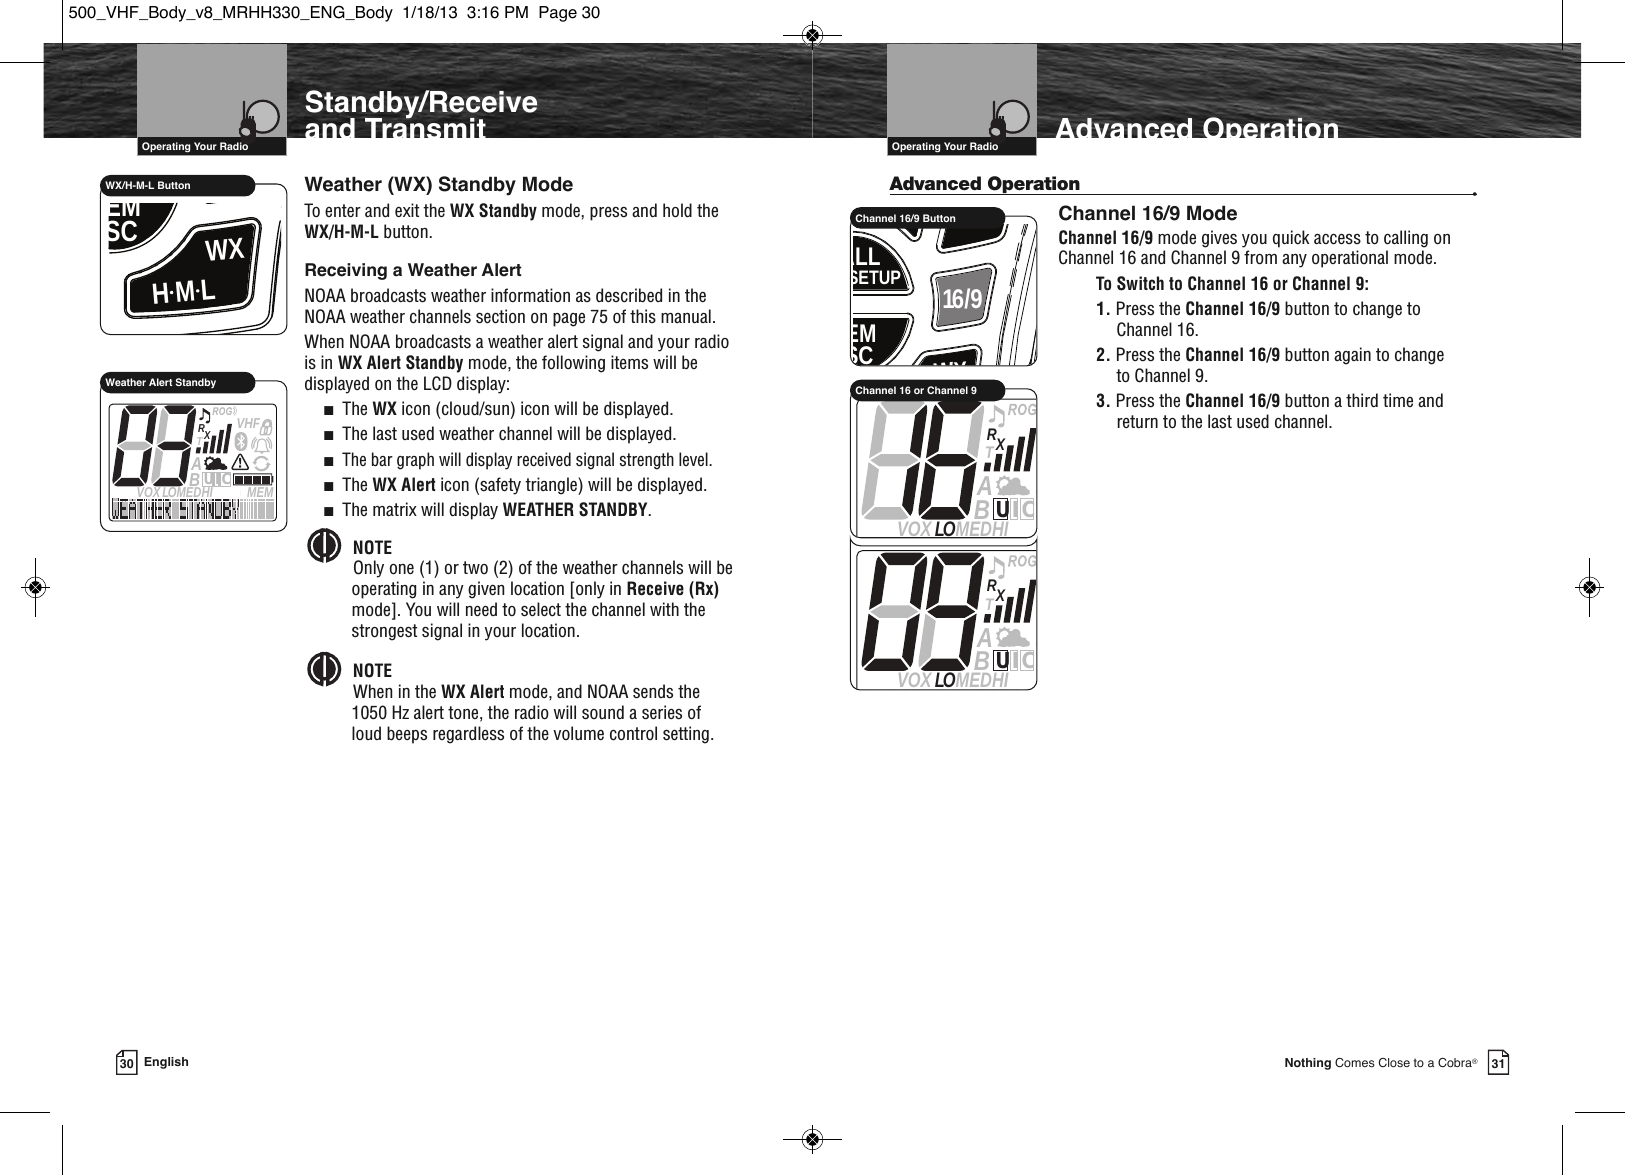 Page 18 of Cobra Electronics MRHH500 BT ACCESSORY IN MARINE RADIO User Manual MRHH330 ENG Body